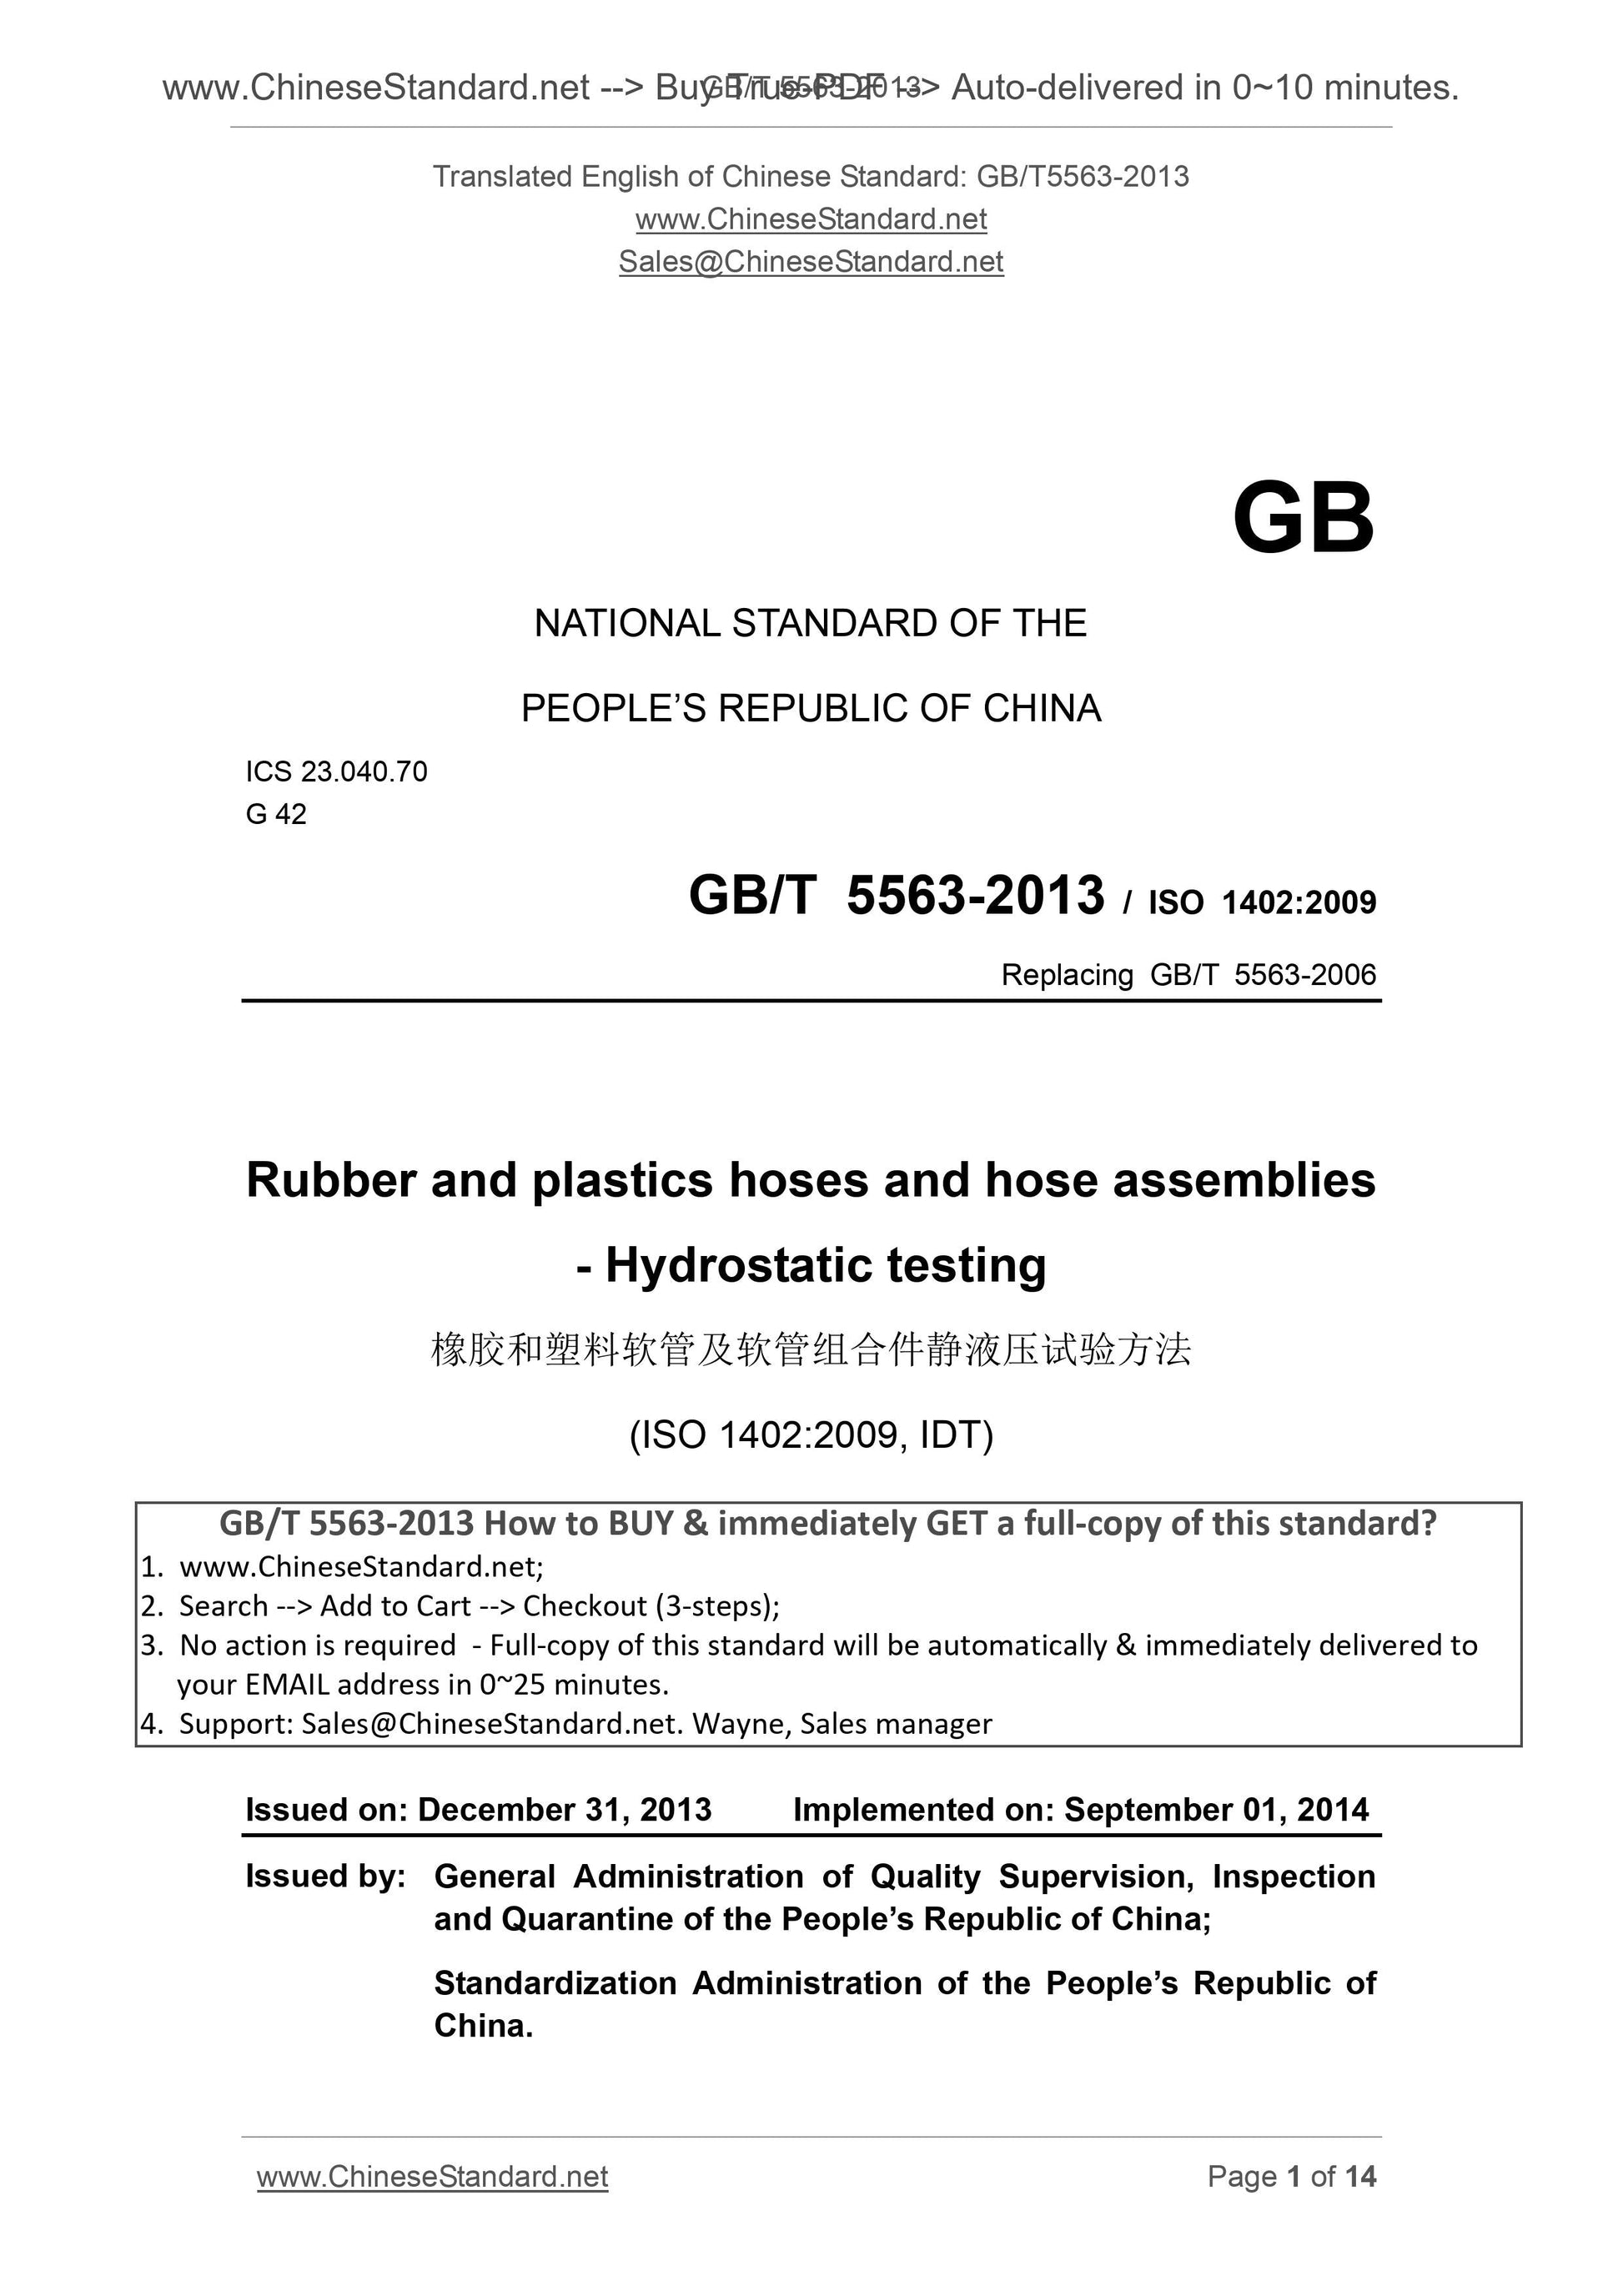 GB/T 5563-2013 Page 1